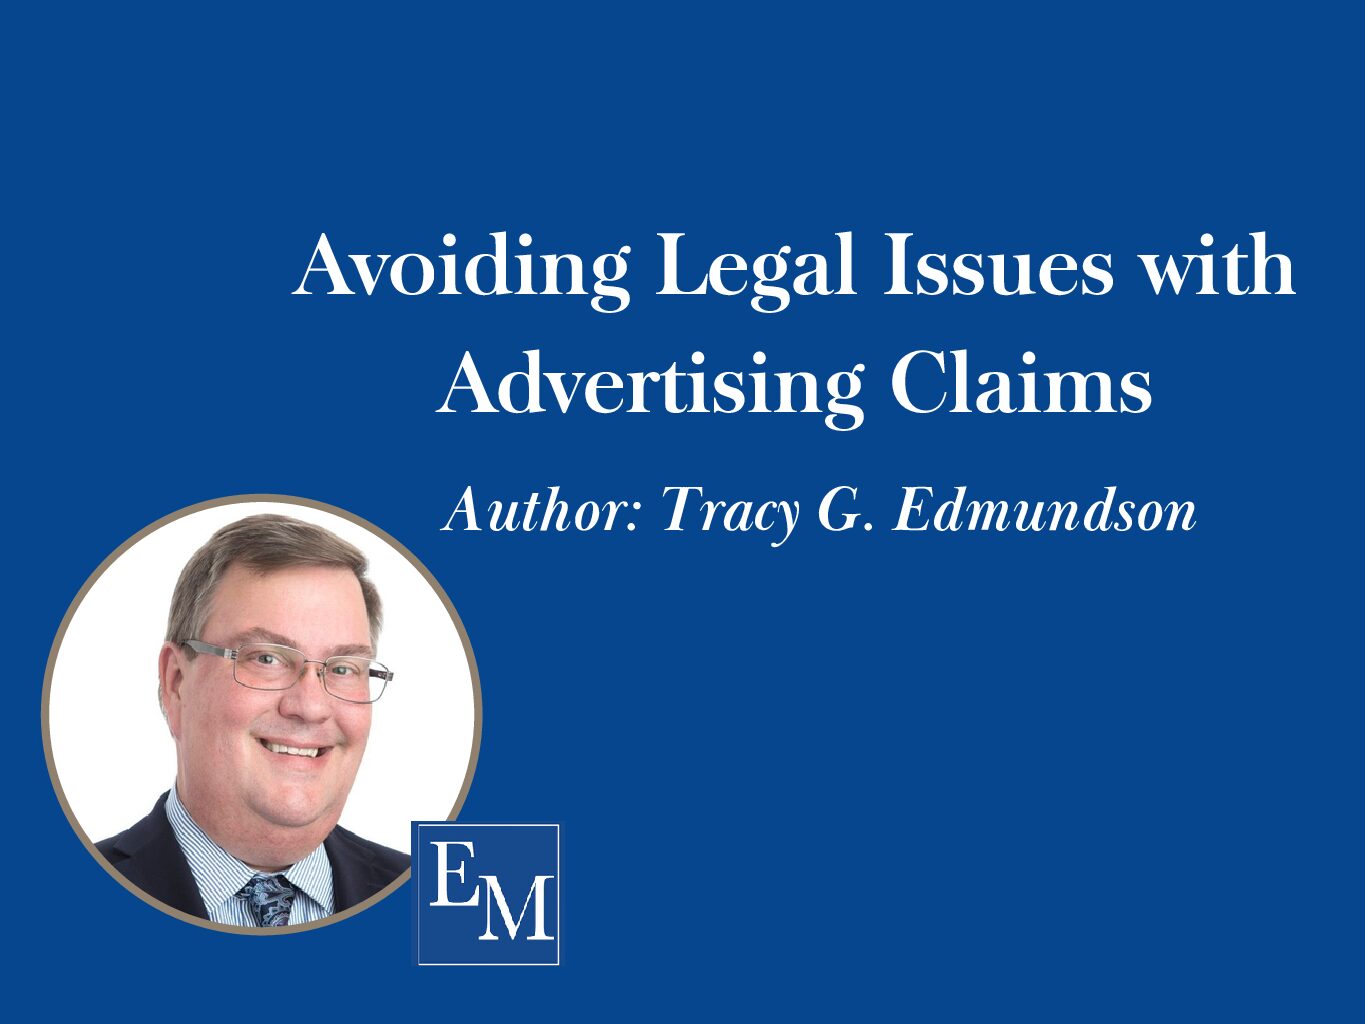 Avoiding Legal Issues with Advertising Claims